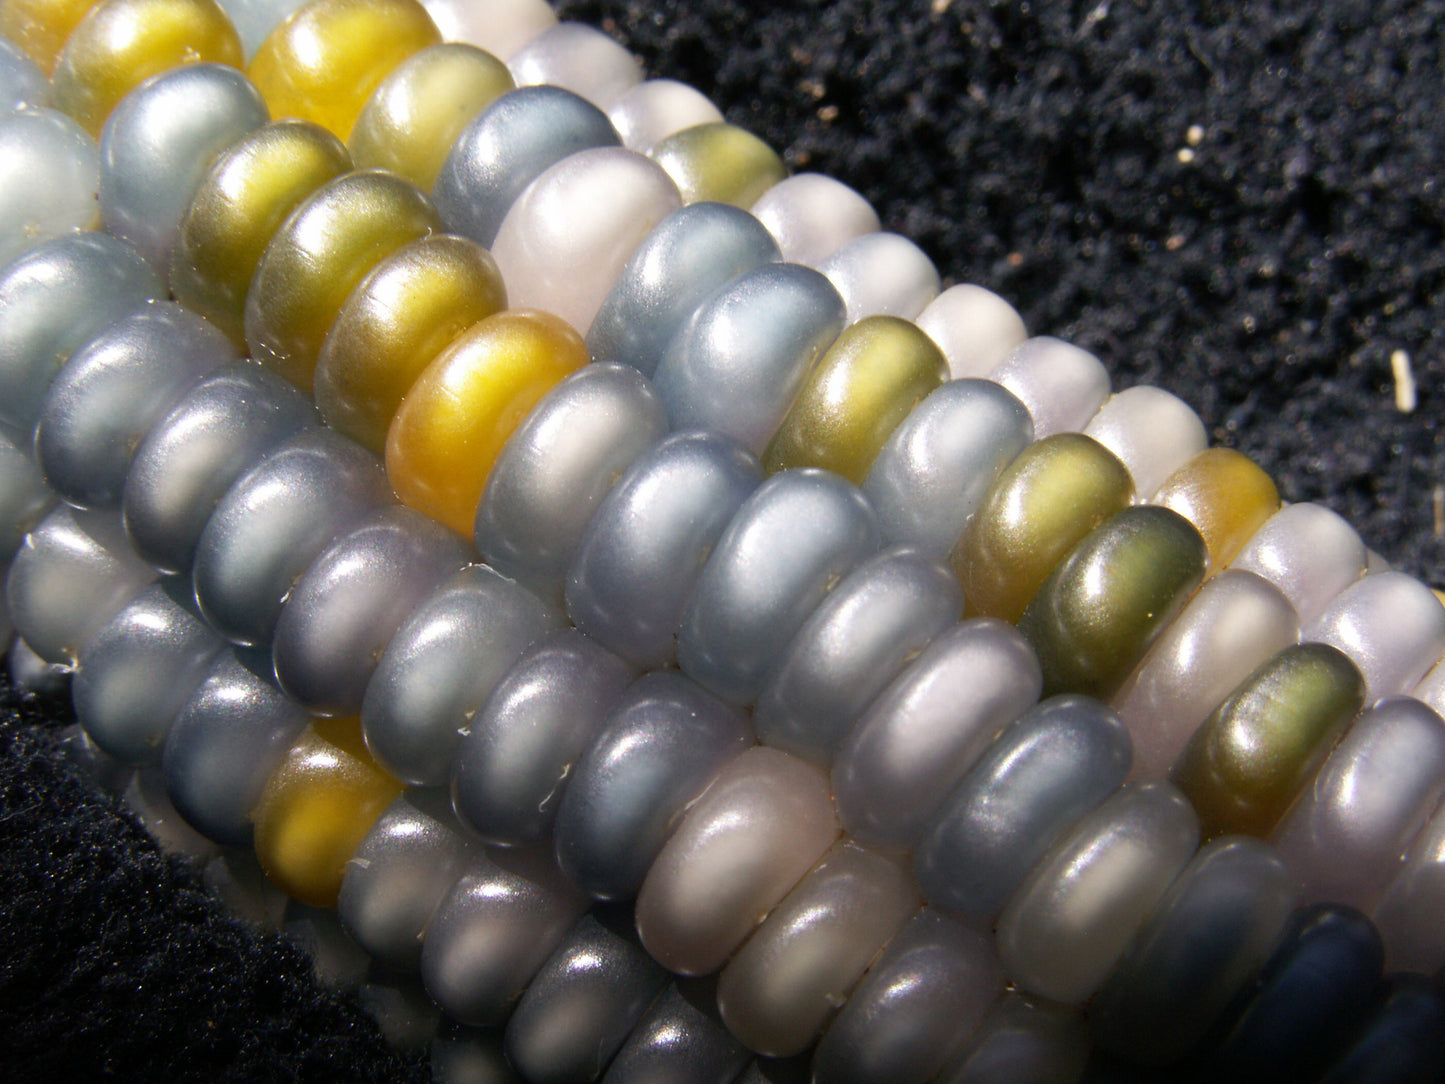  Glass Gem Indian Corn Heirloom Seed - The Most Beautiful Corn  in the World! : Corn Plants : Patio, Lawn & Garden